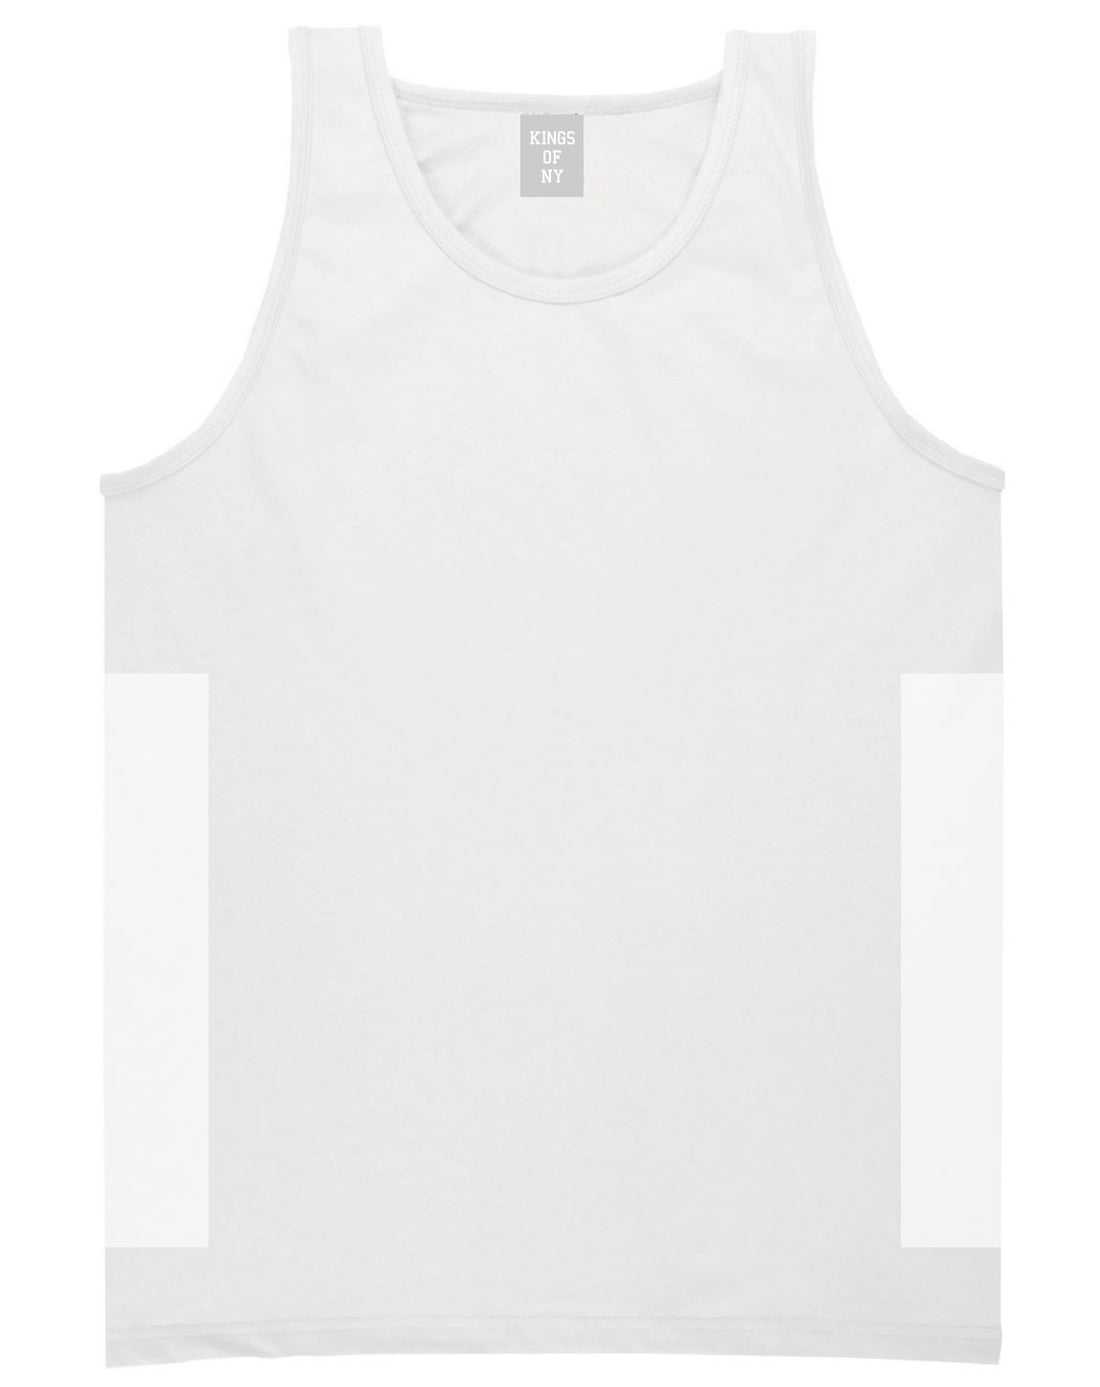 Side Box Hood Tank Top in White by Kings Of NY